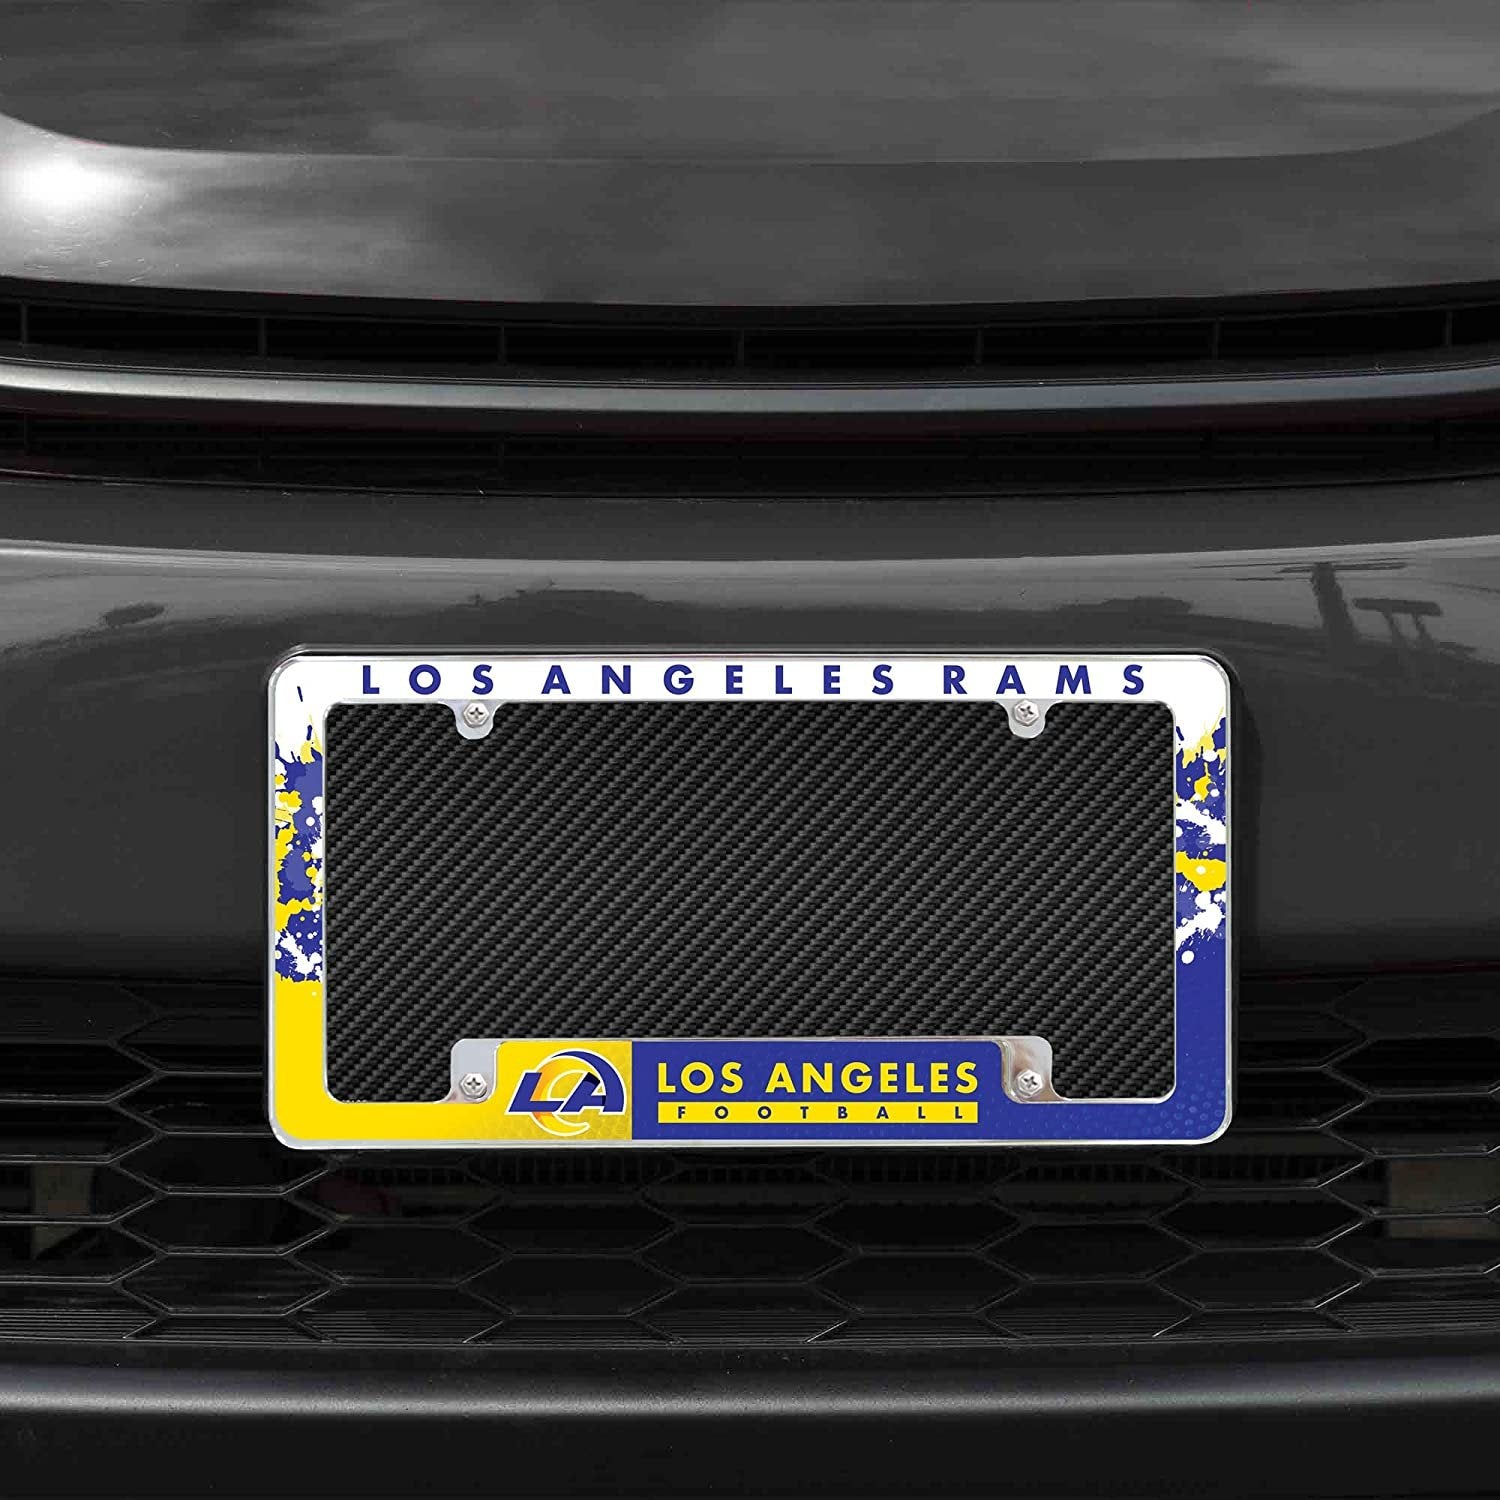 Los Angeles Rams Metal License Plate Frame Chrome Tag Cover All Over Design 6x12 Inch